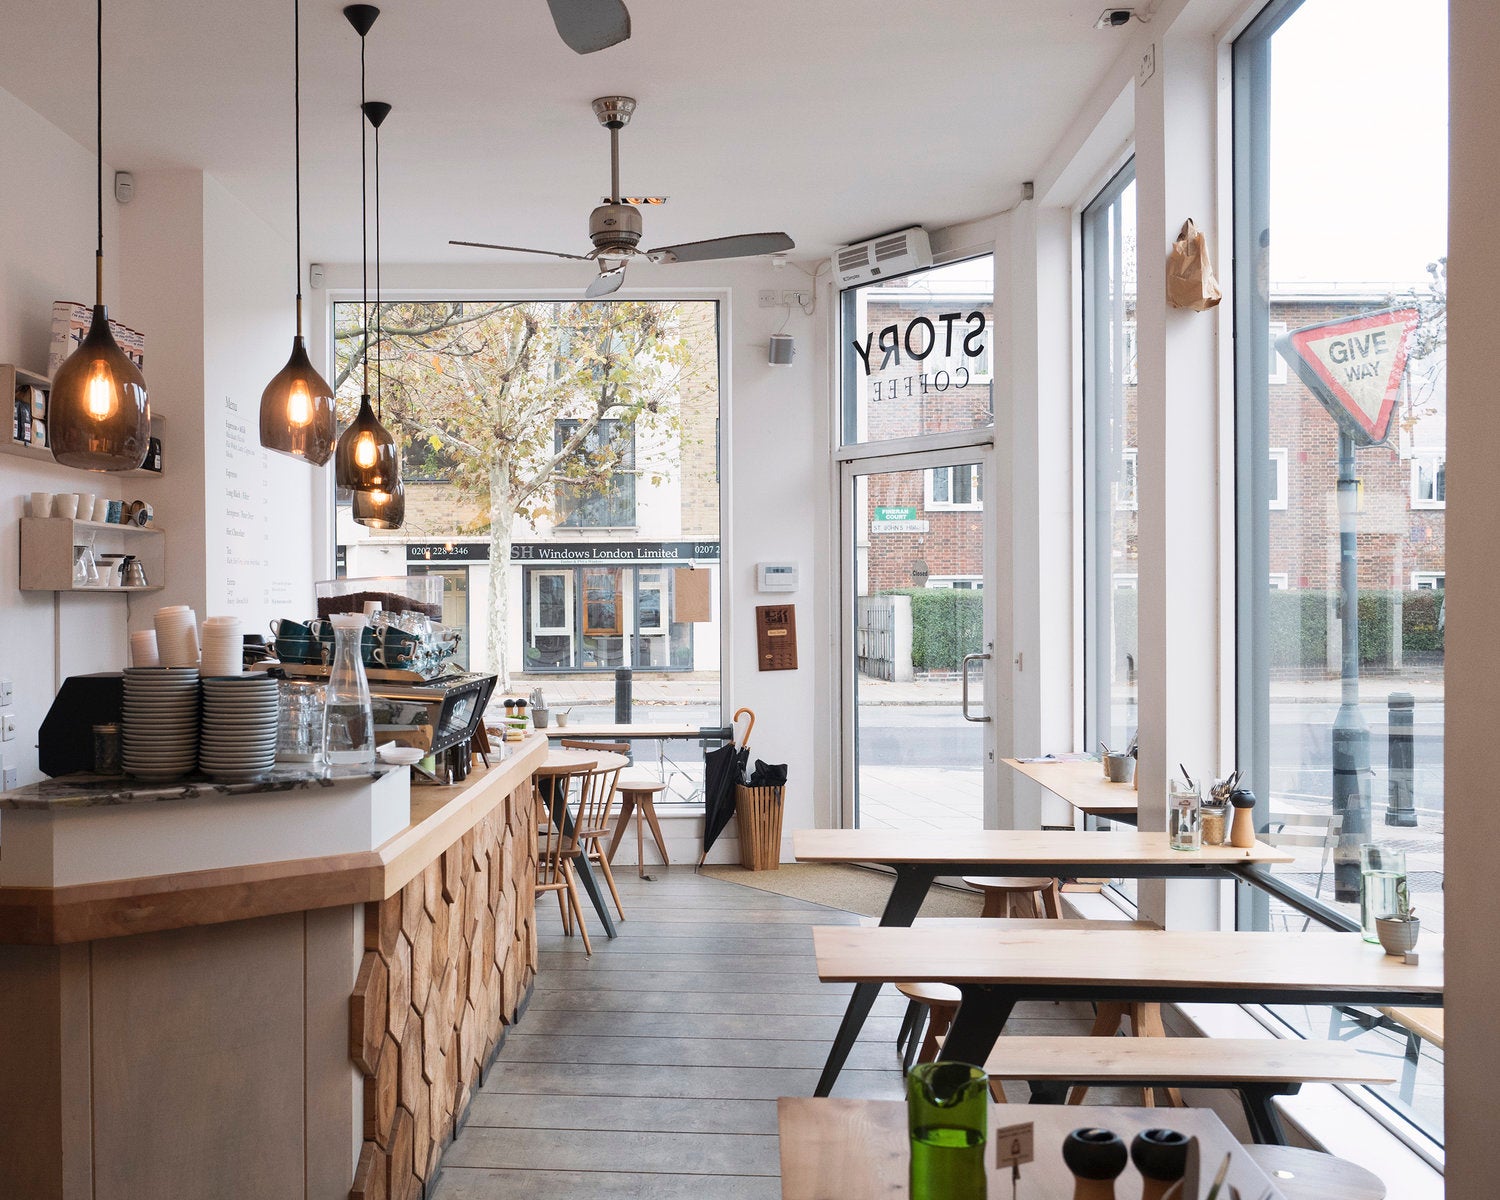 6 of the best independent coffee shops in London